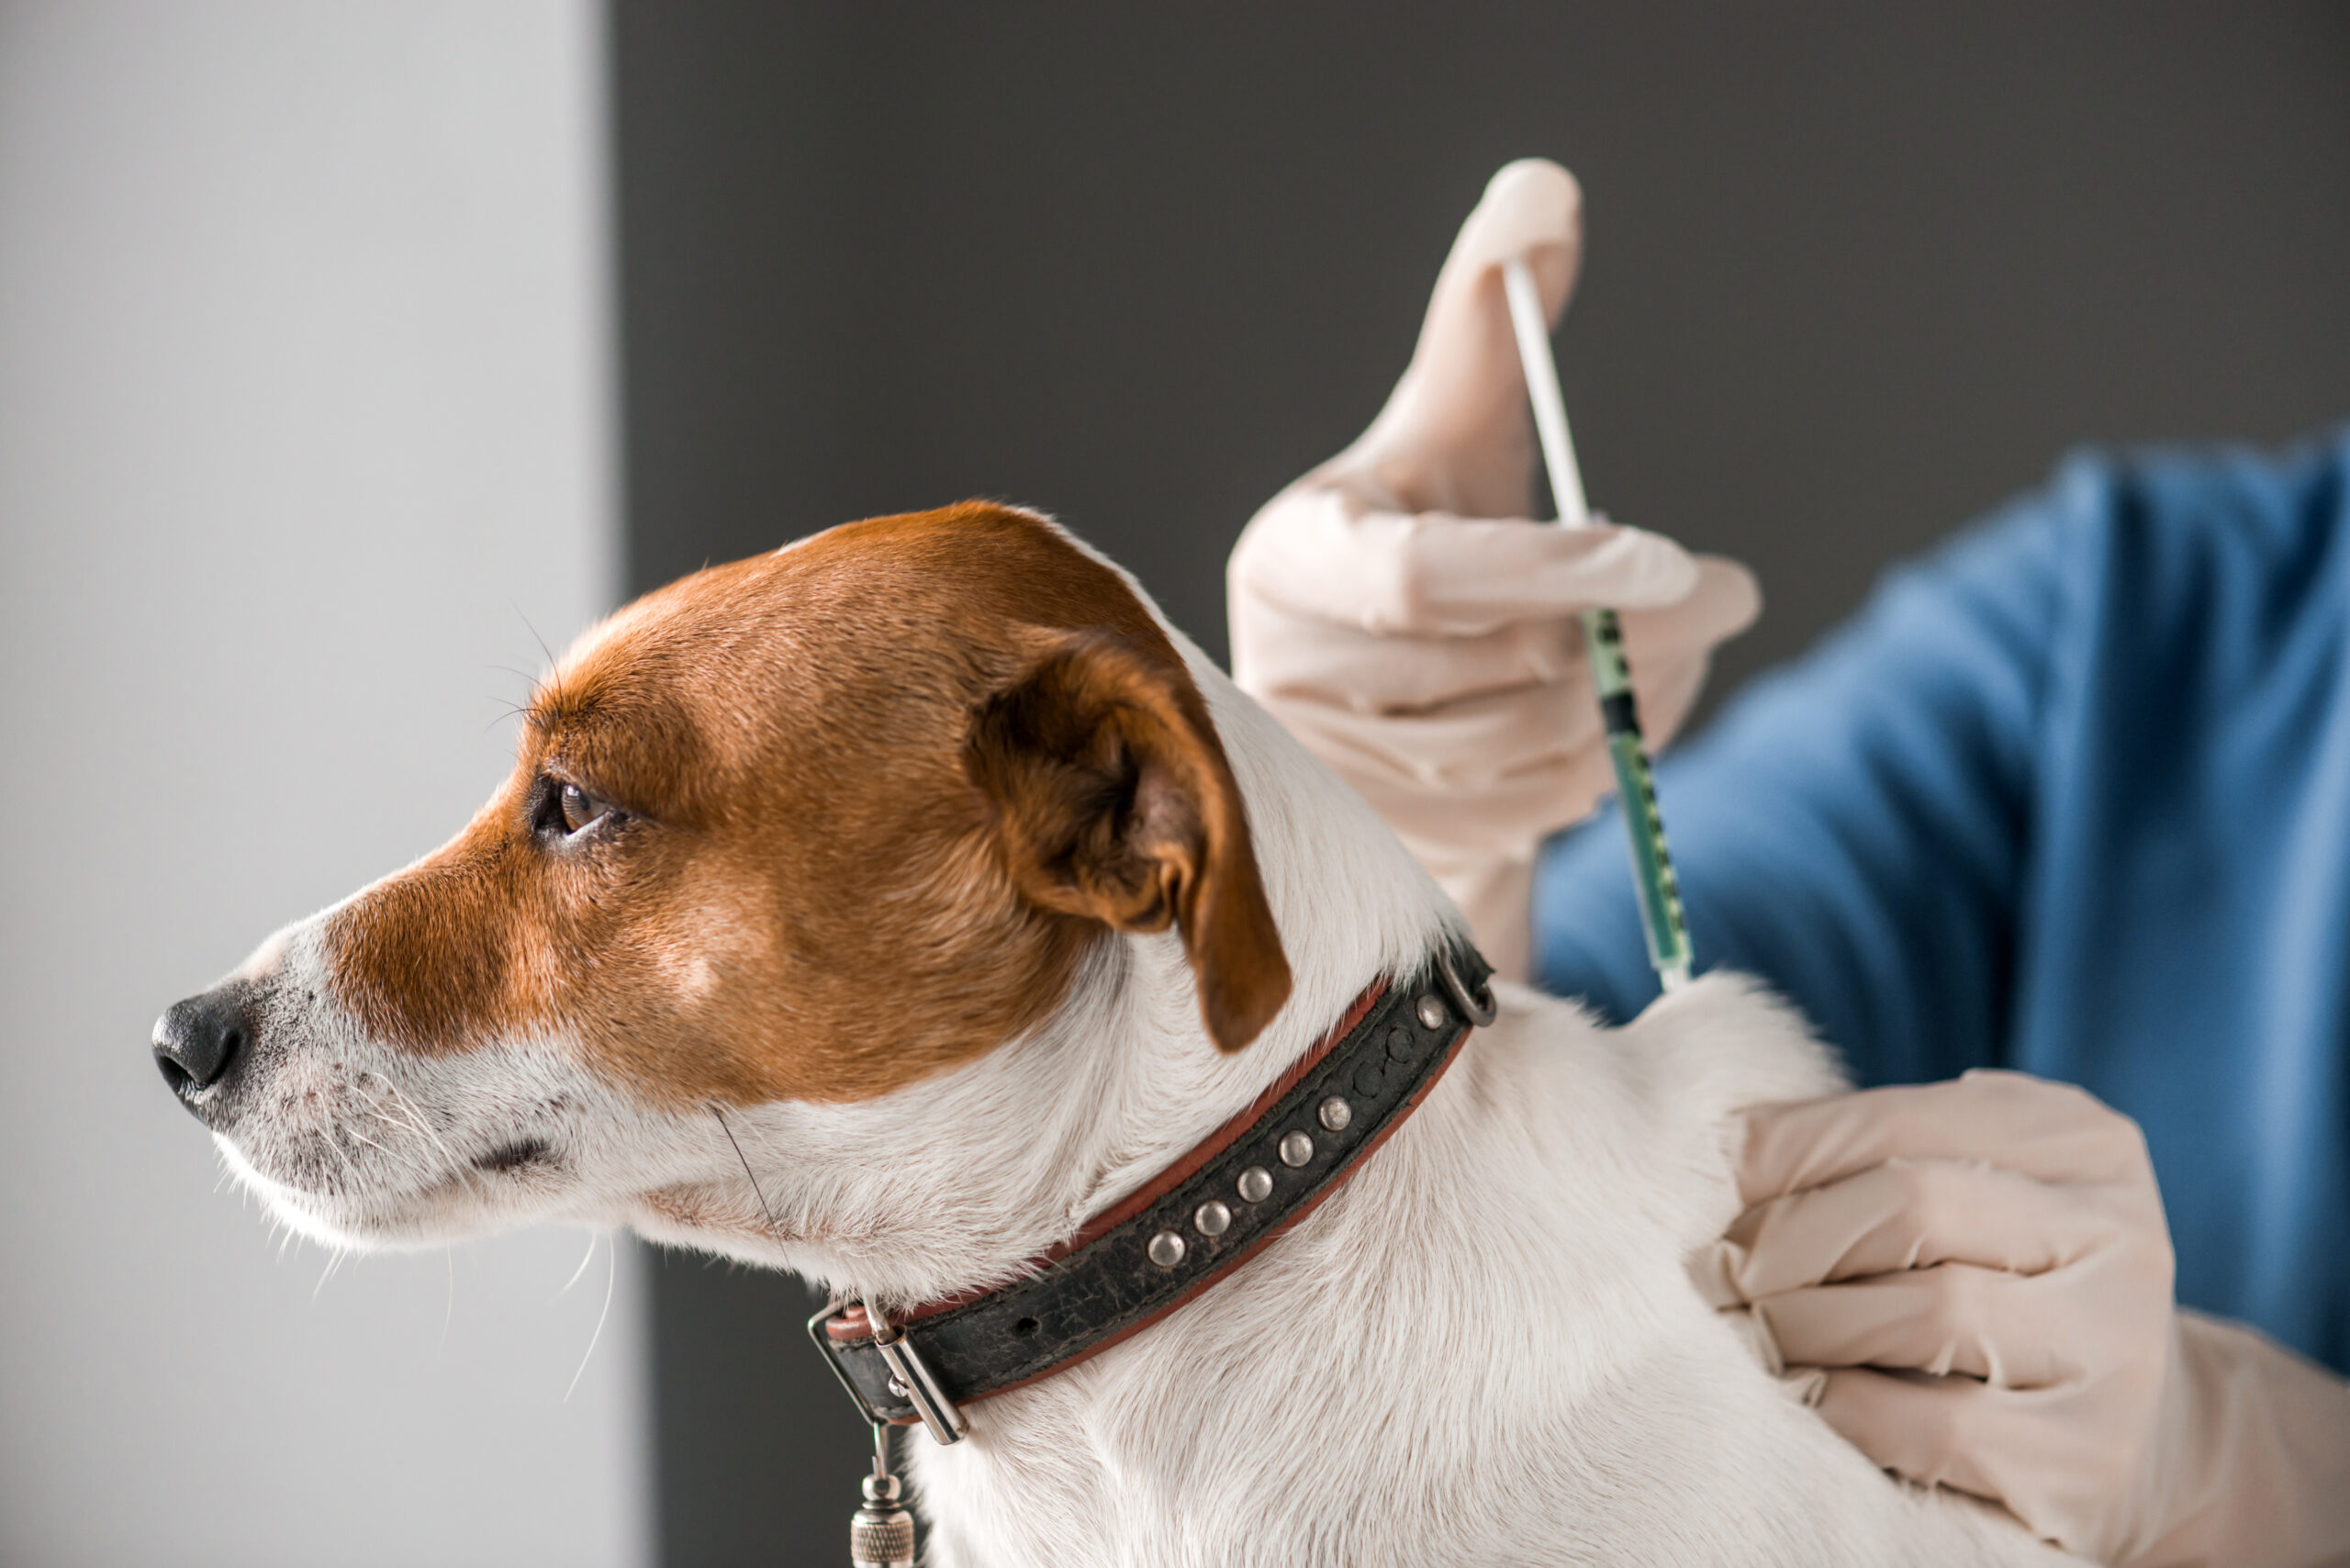 C5 vaccination for dogs